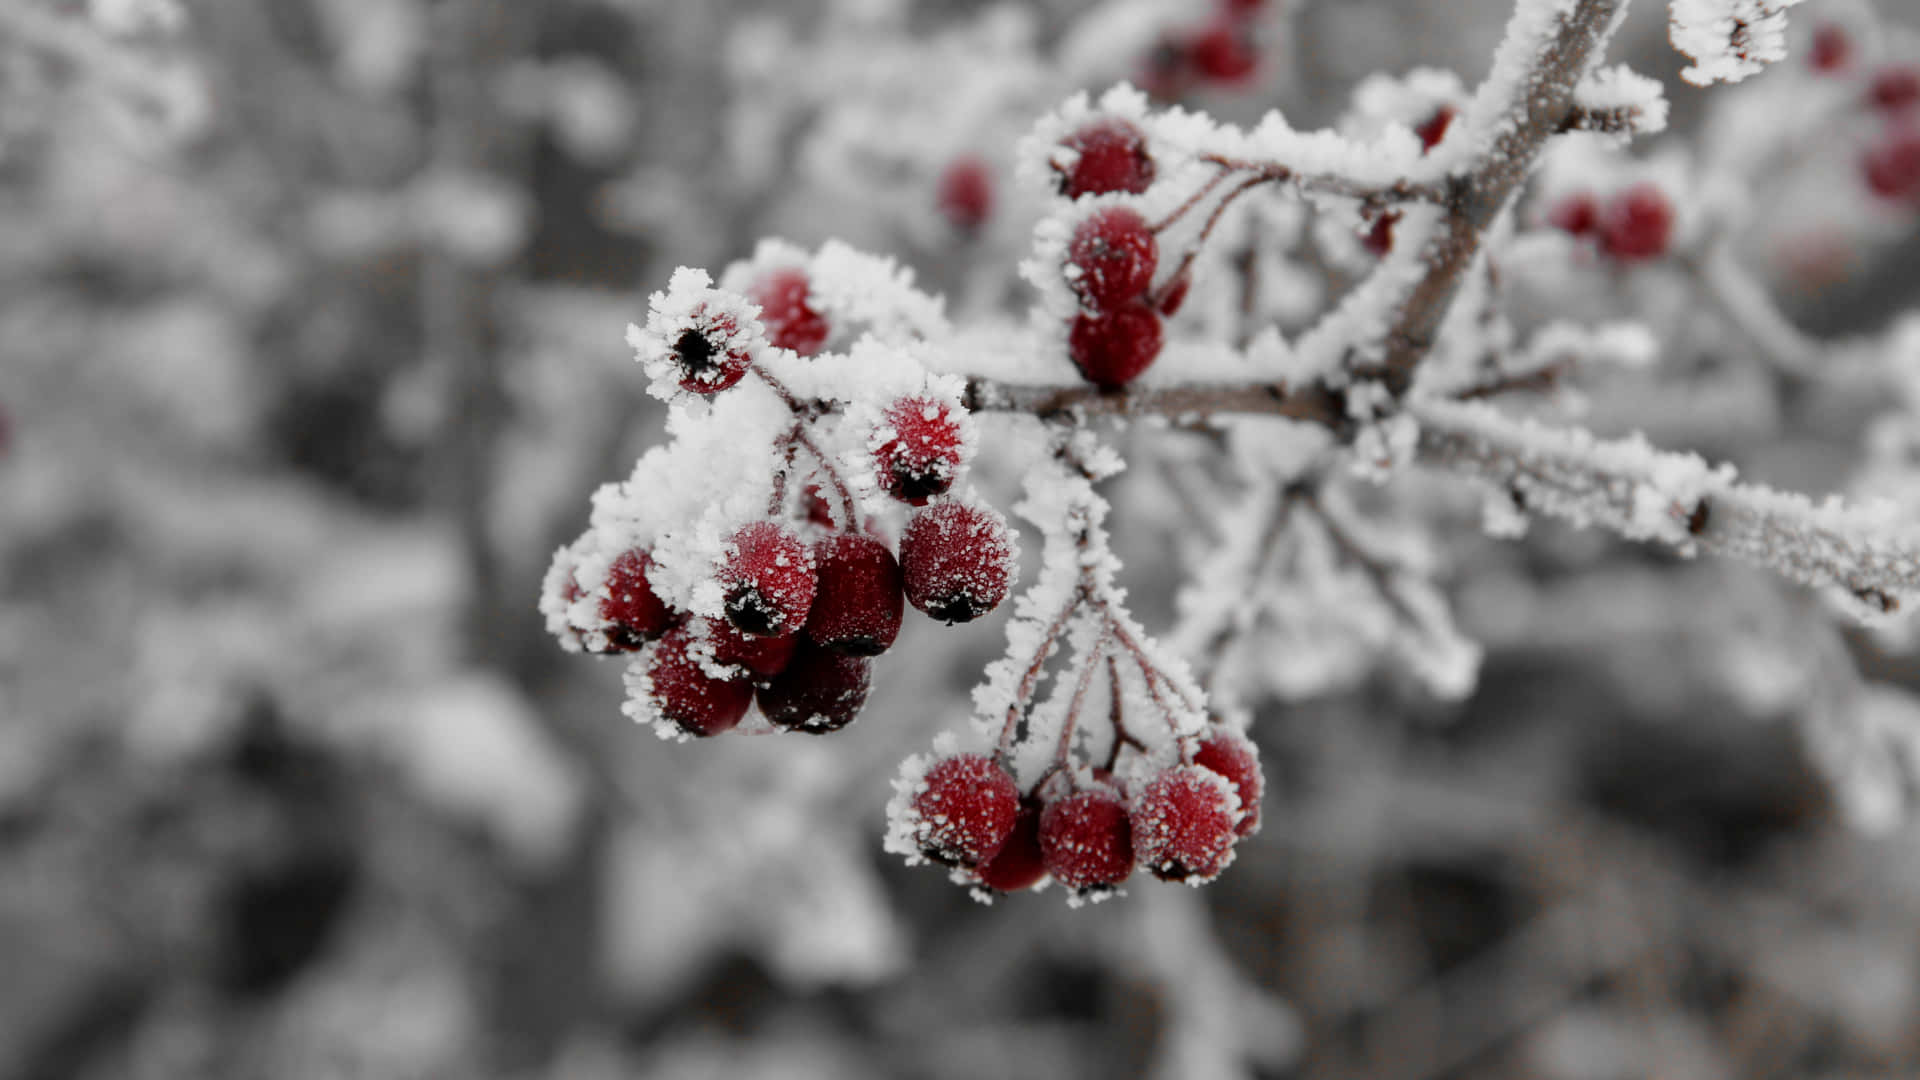 Winter Fruits in a Snowy Setting Wallpaper